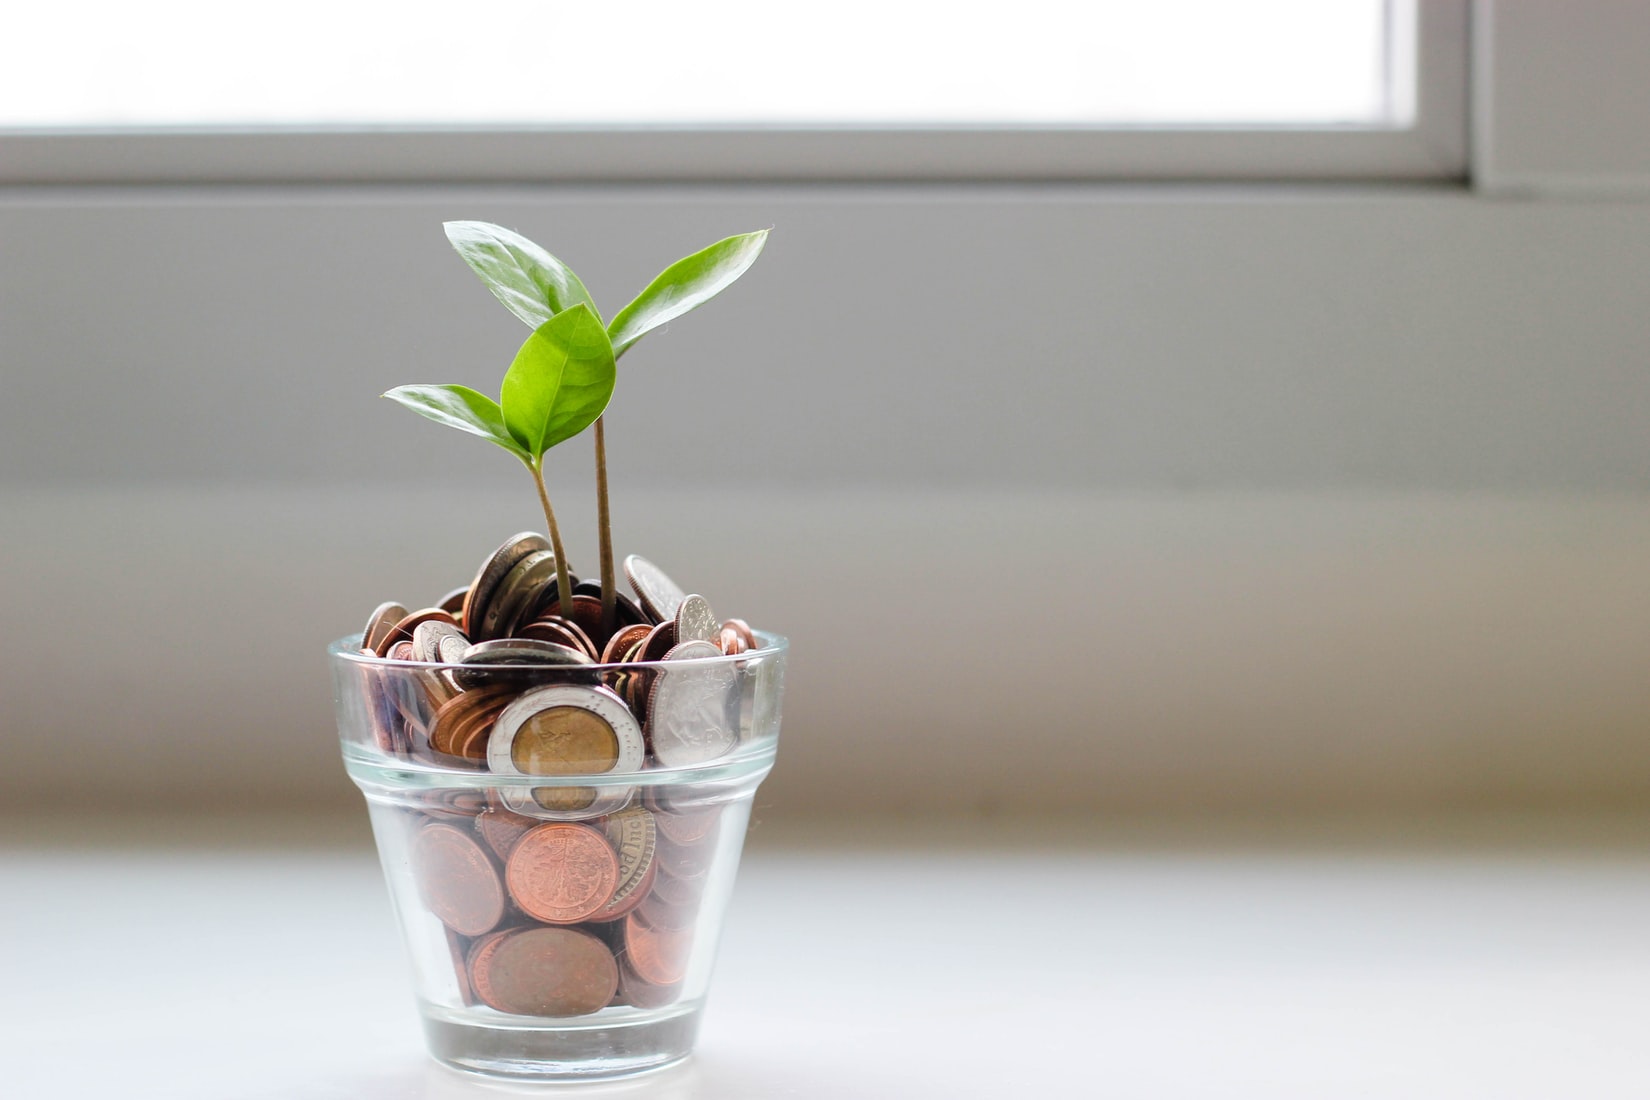 A small plant growing out of coins